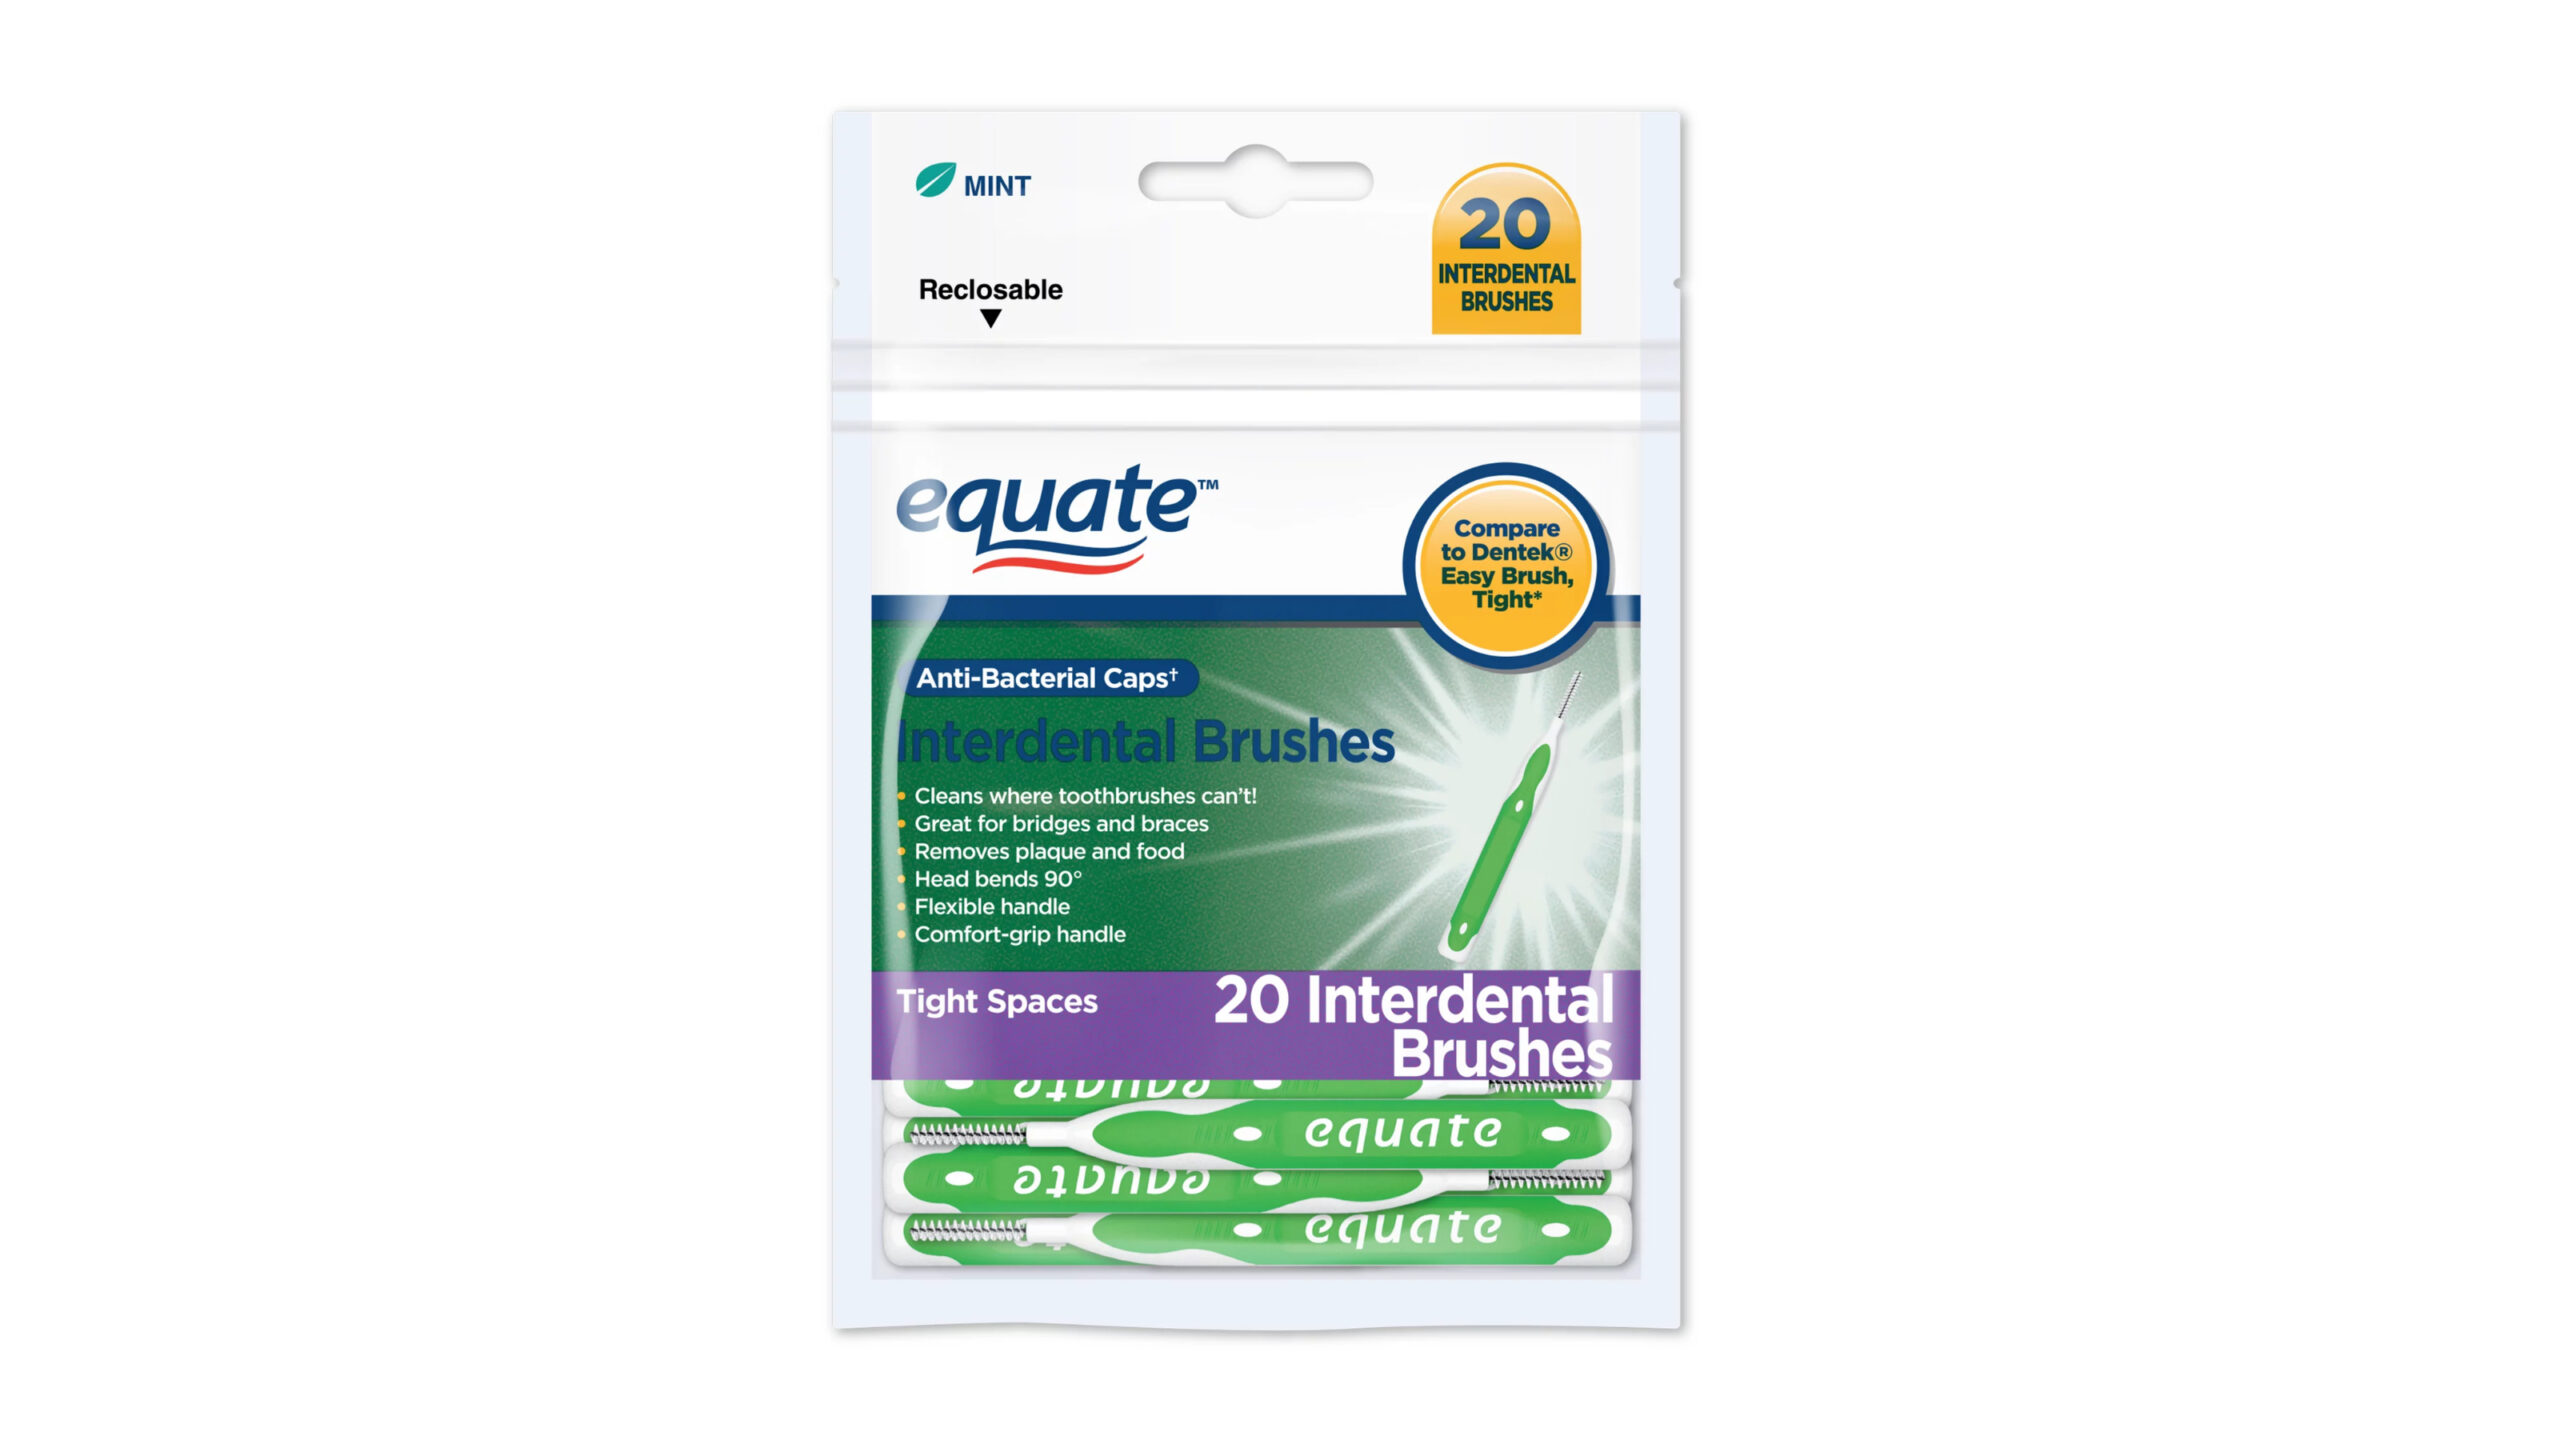 packet with 20 interdental equate brushes